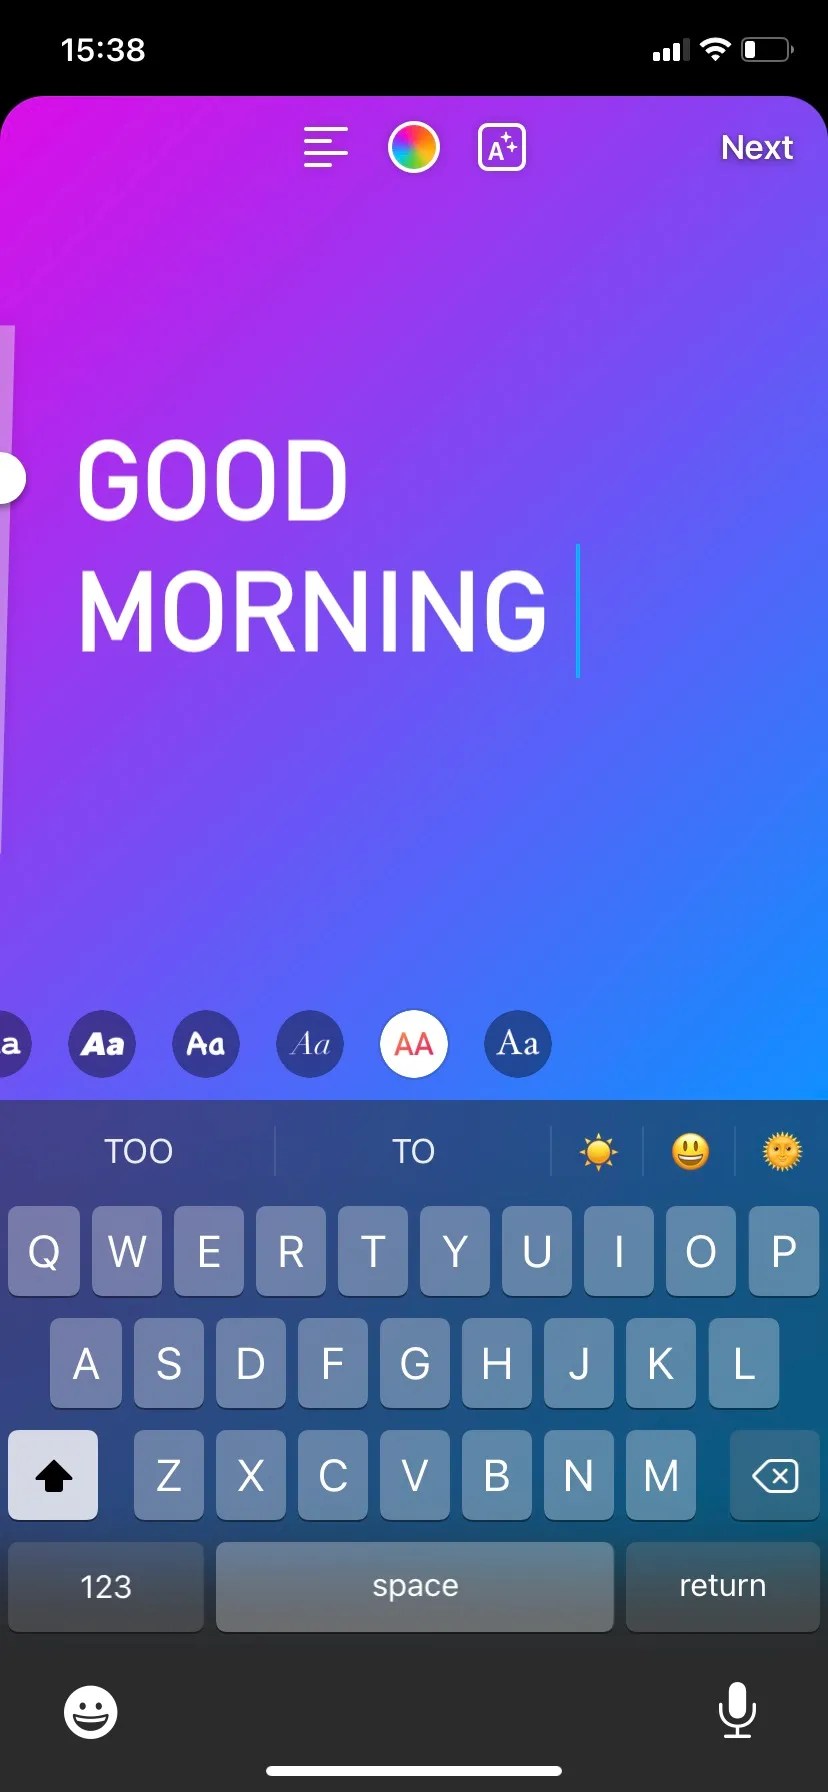 Adding a text-based Instagram Story